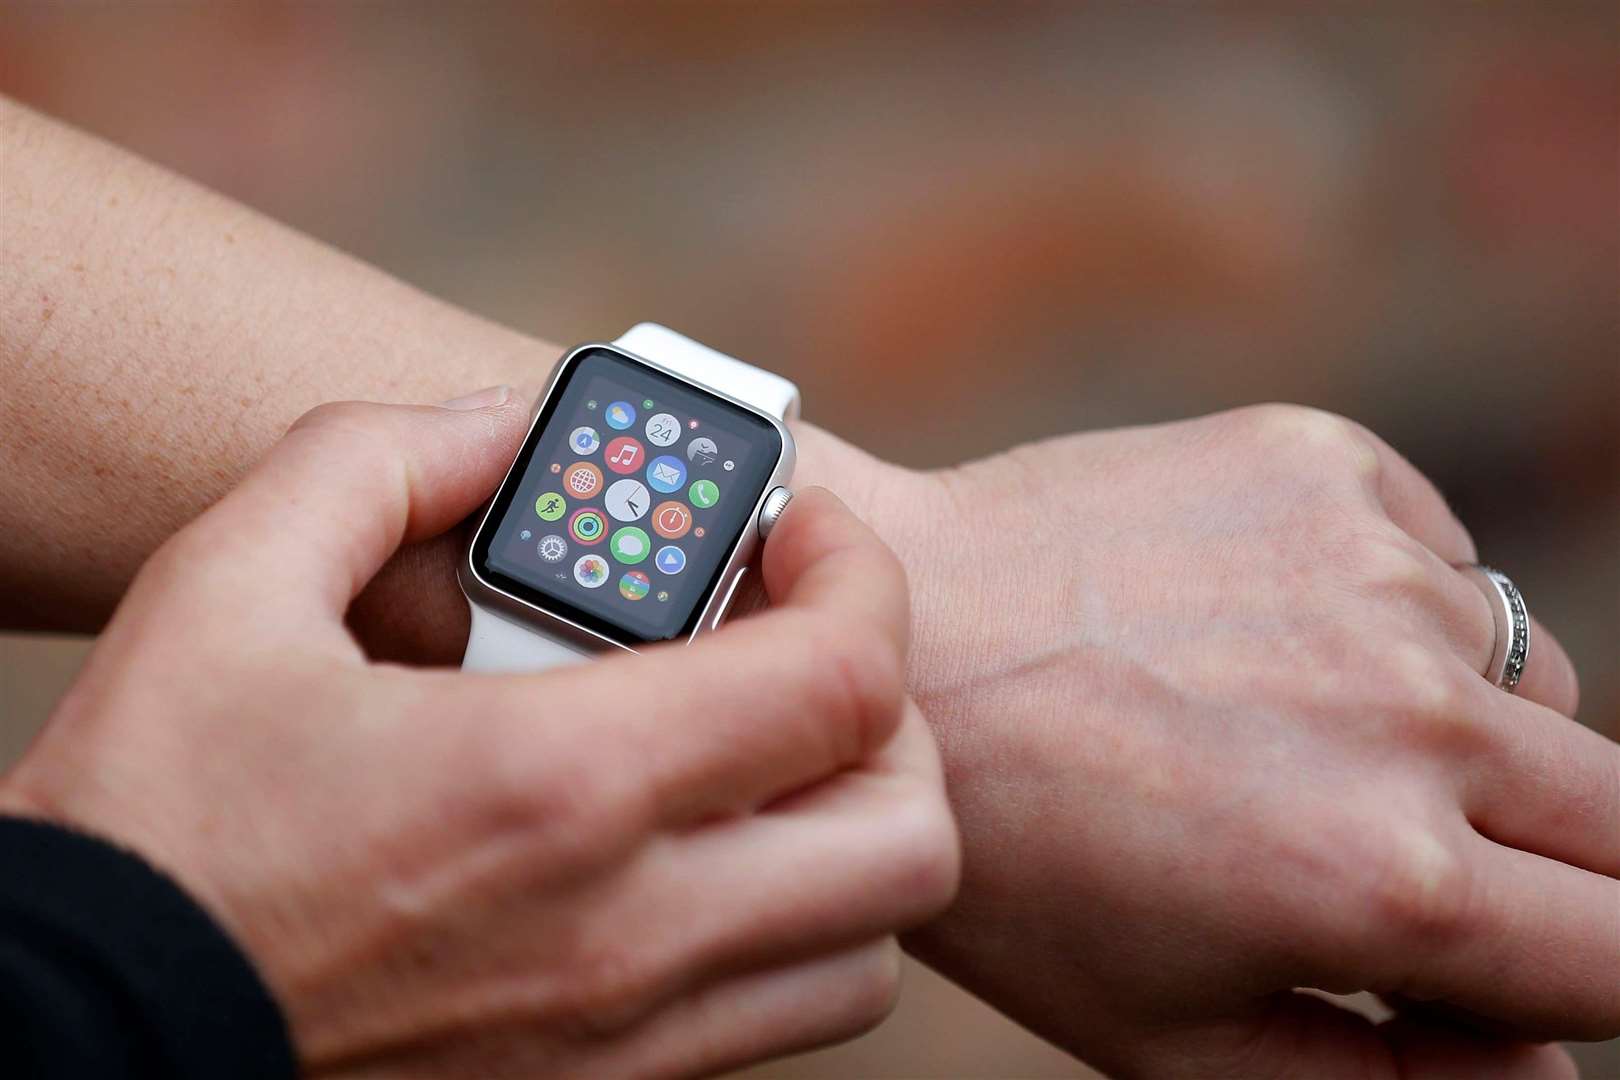 Data from Apple watches and Fitbits should be donated to NHS, Tory MP says